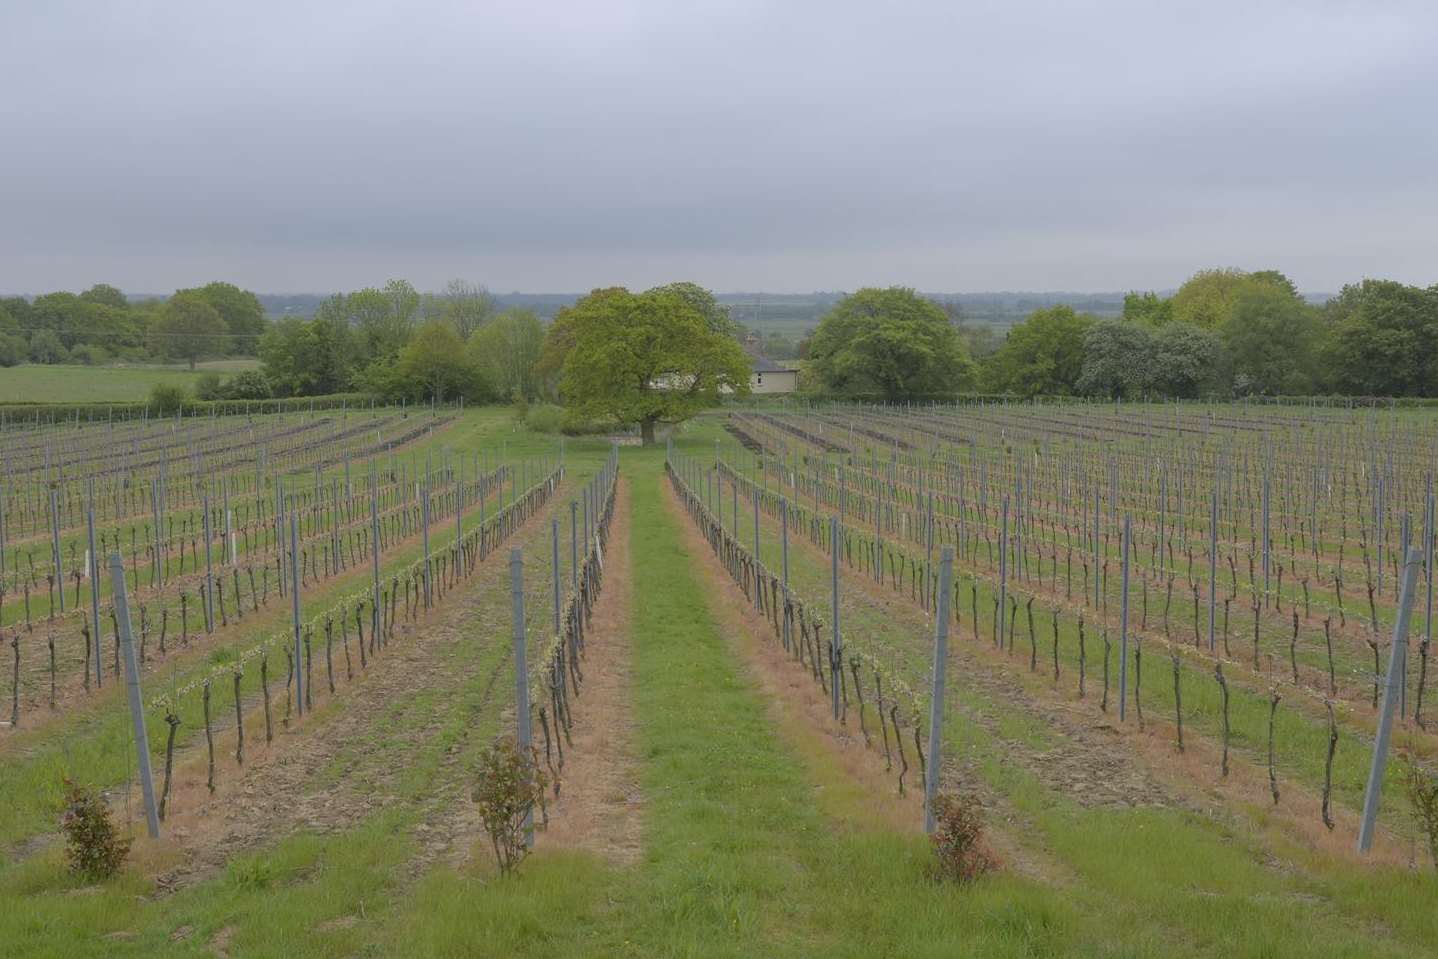 Gusbourne vineyard has planted another 50 acres of vines this year